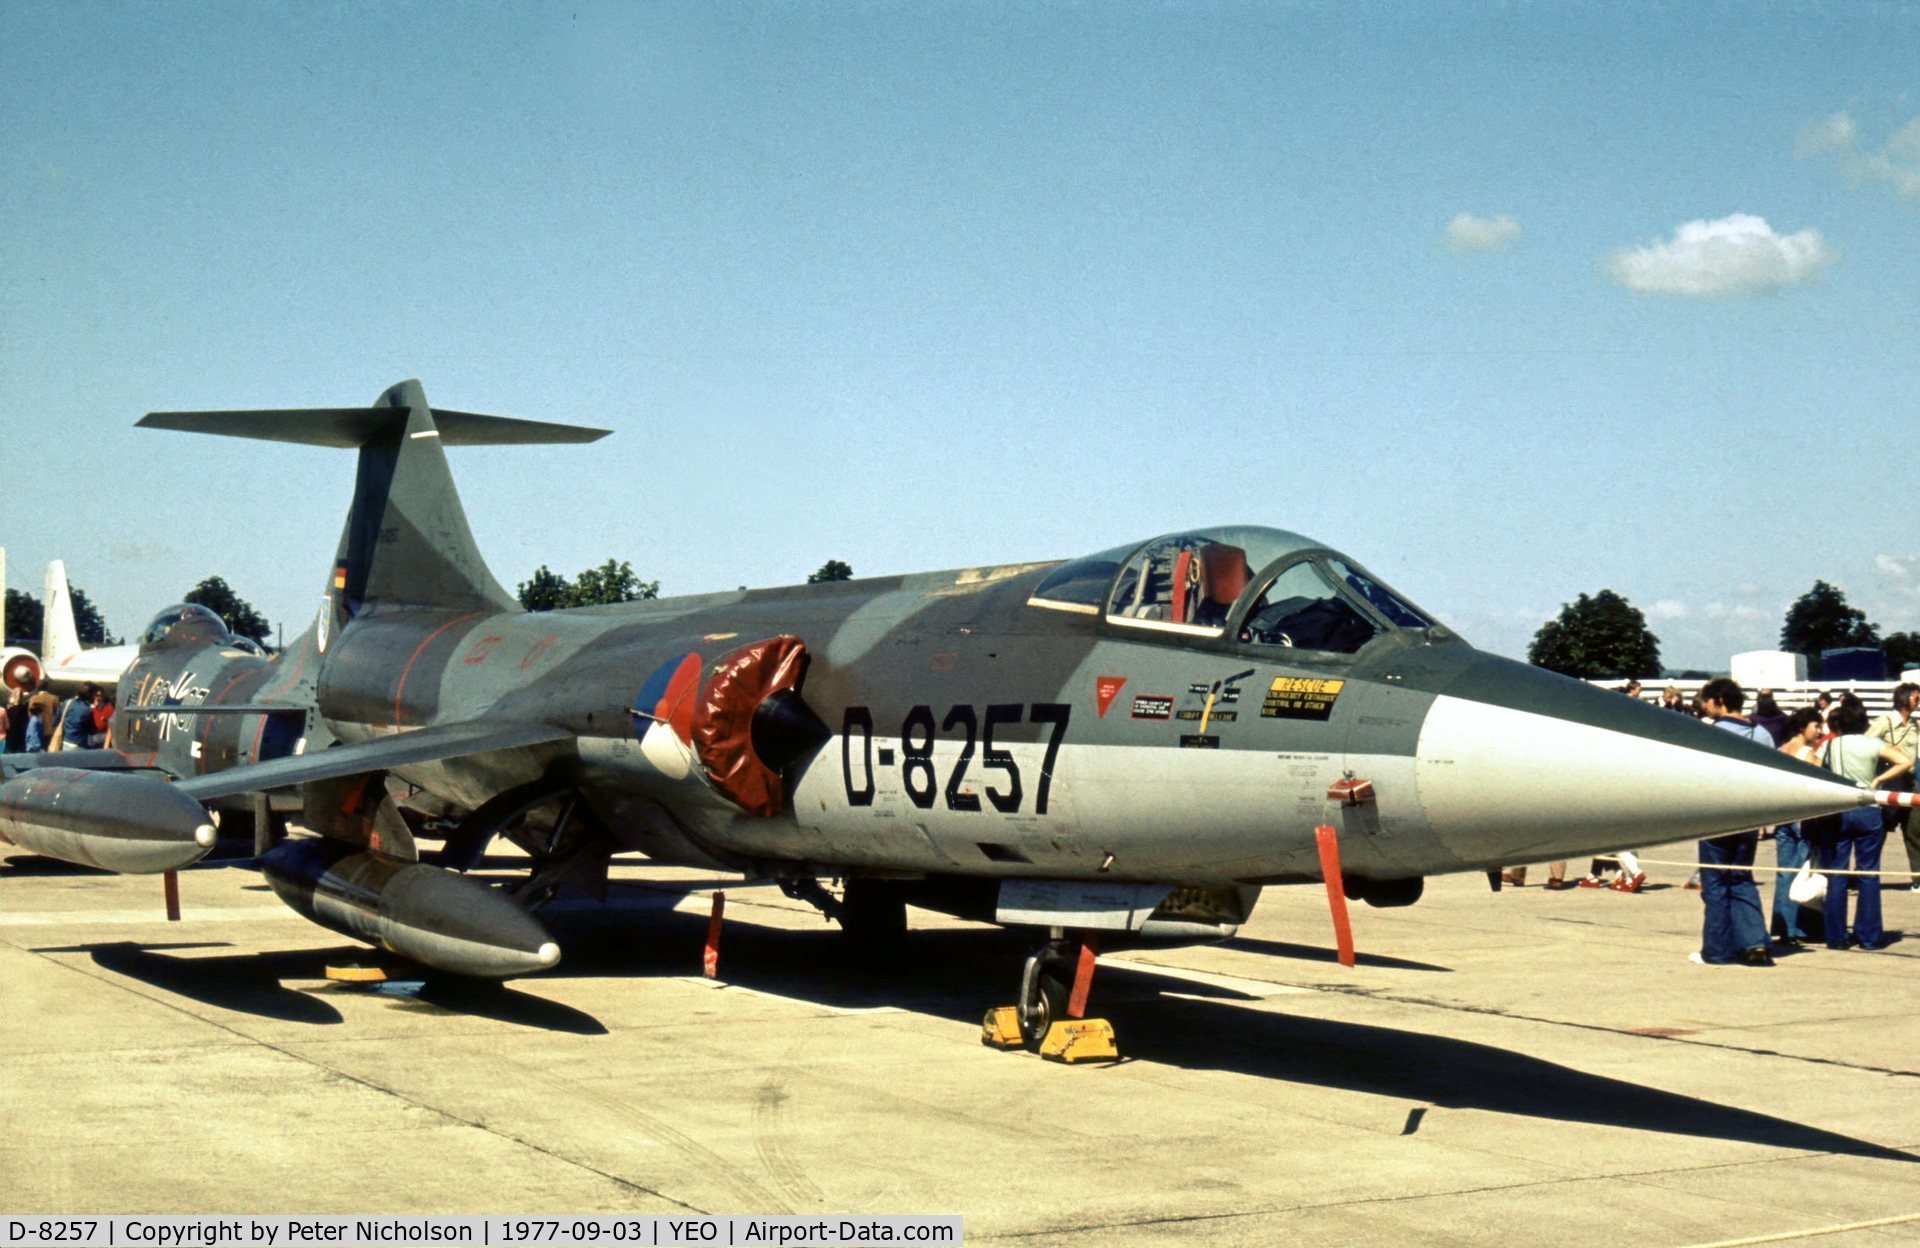 D-8257, Lockheed F-104G Starfighter C/N 683-8257, F-104G of the Royal Netherlands Air Force at the 1977 RNAS Yeovilton Air Day.